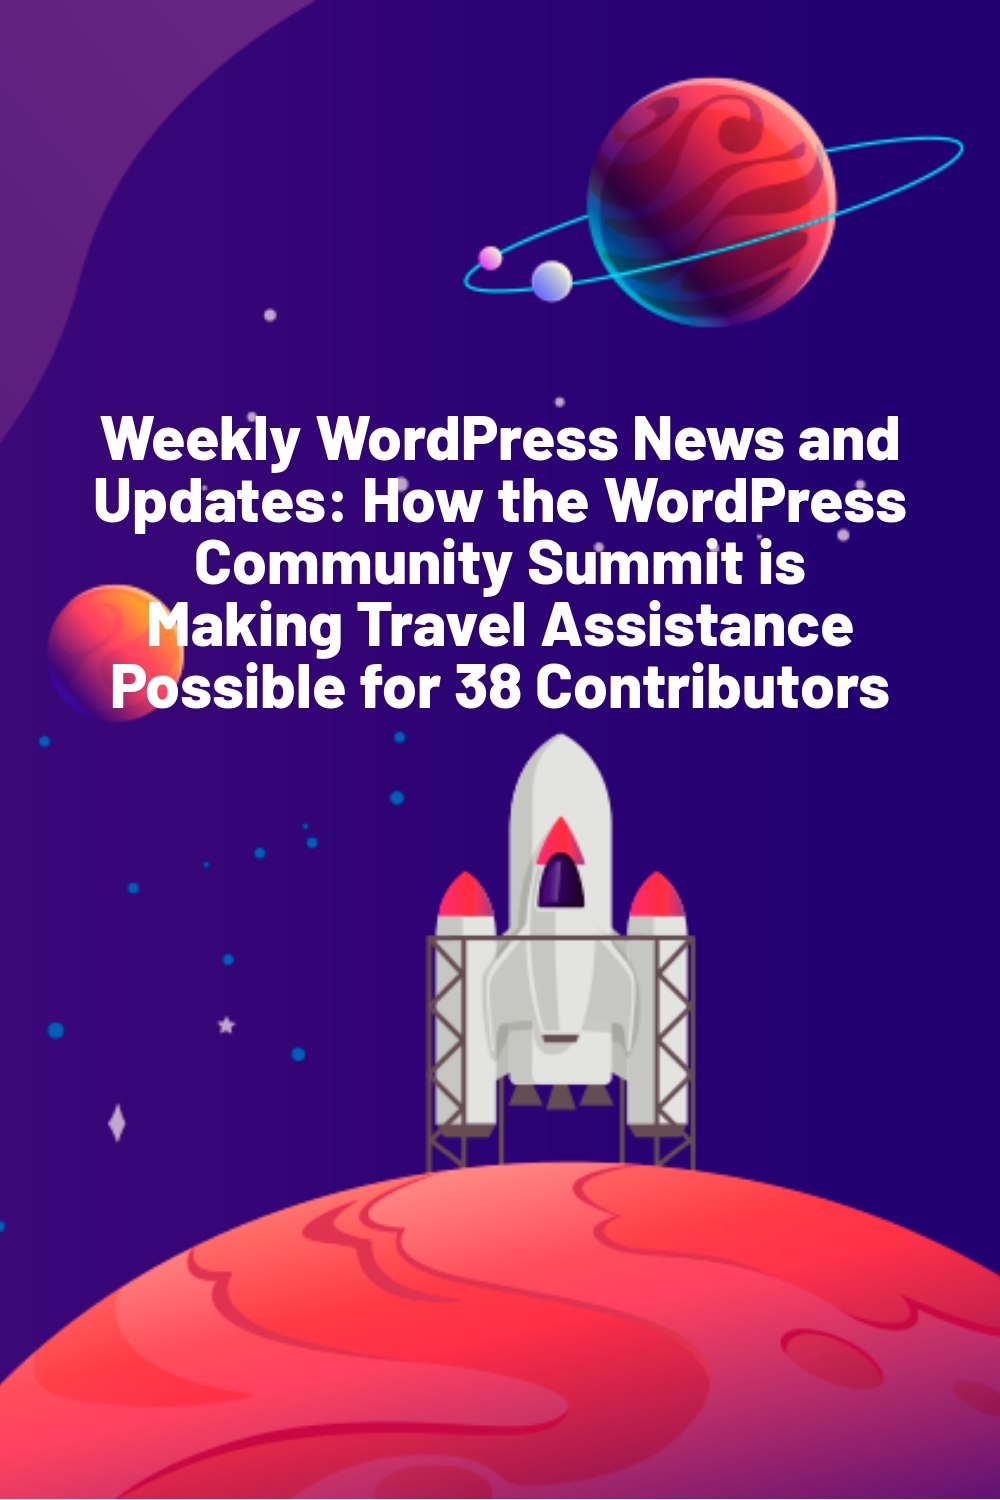 Weekly WordPress News and Updates: How the WordPress Community Summit is Making Travel Assistance Possible for 38 Contributors